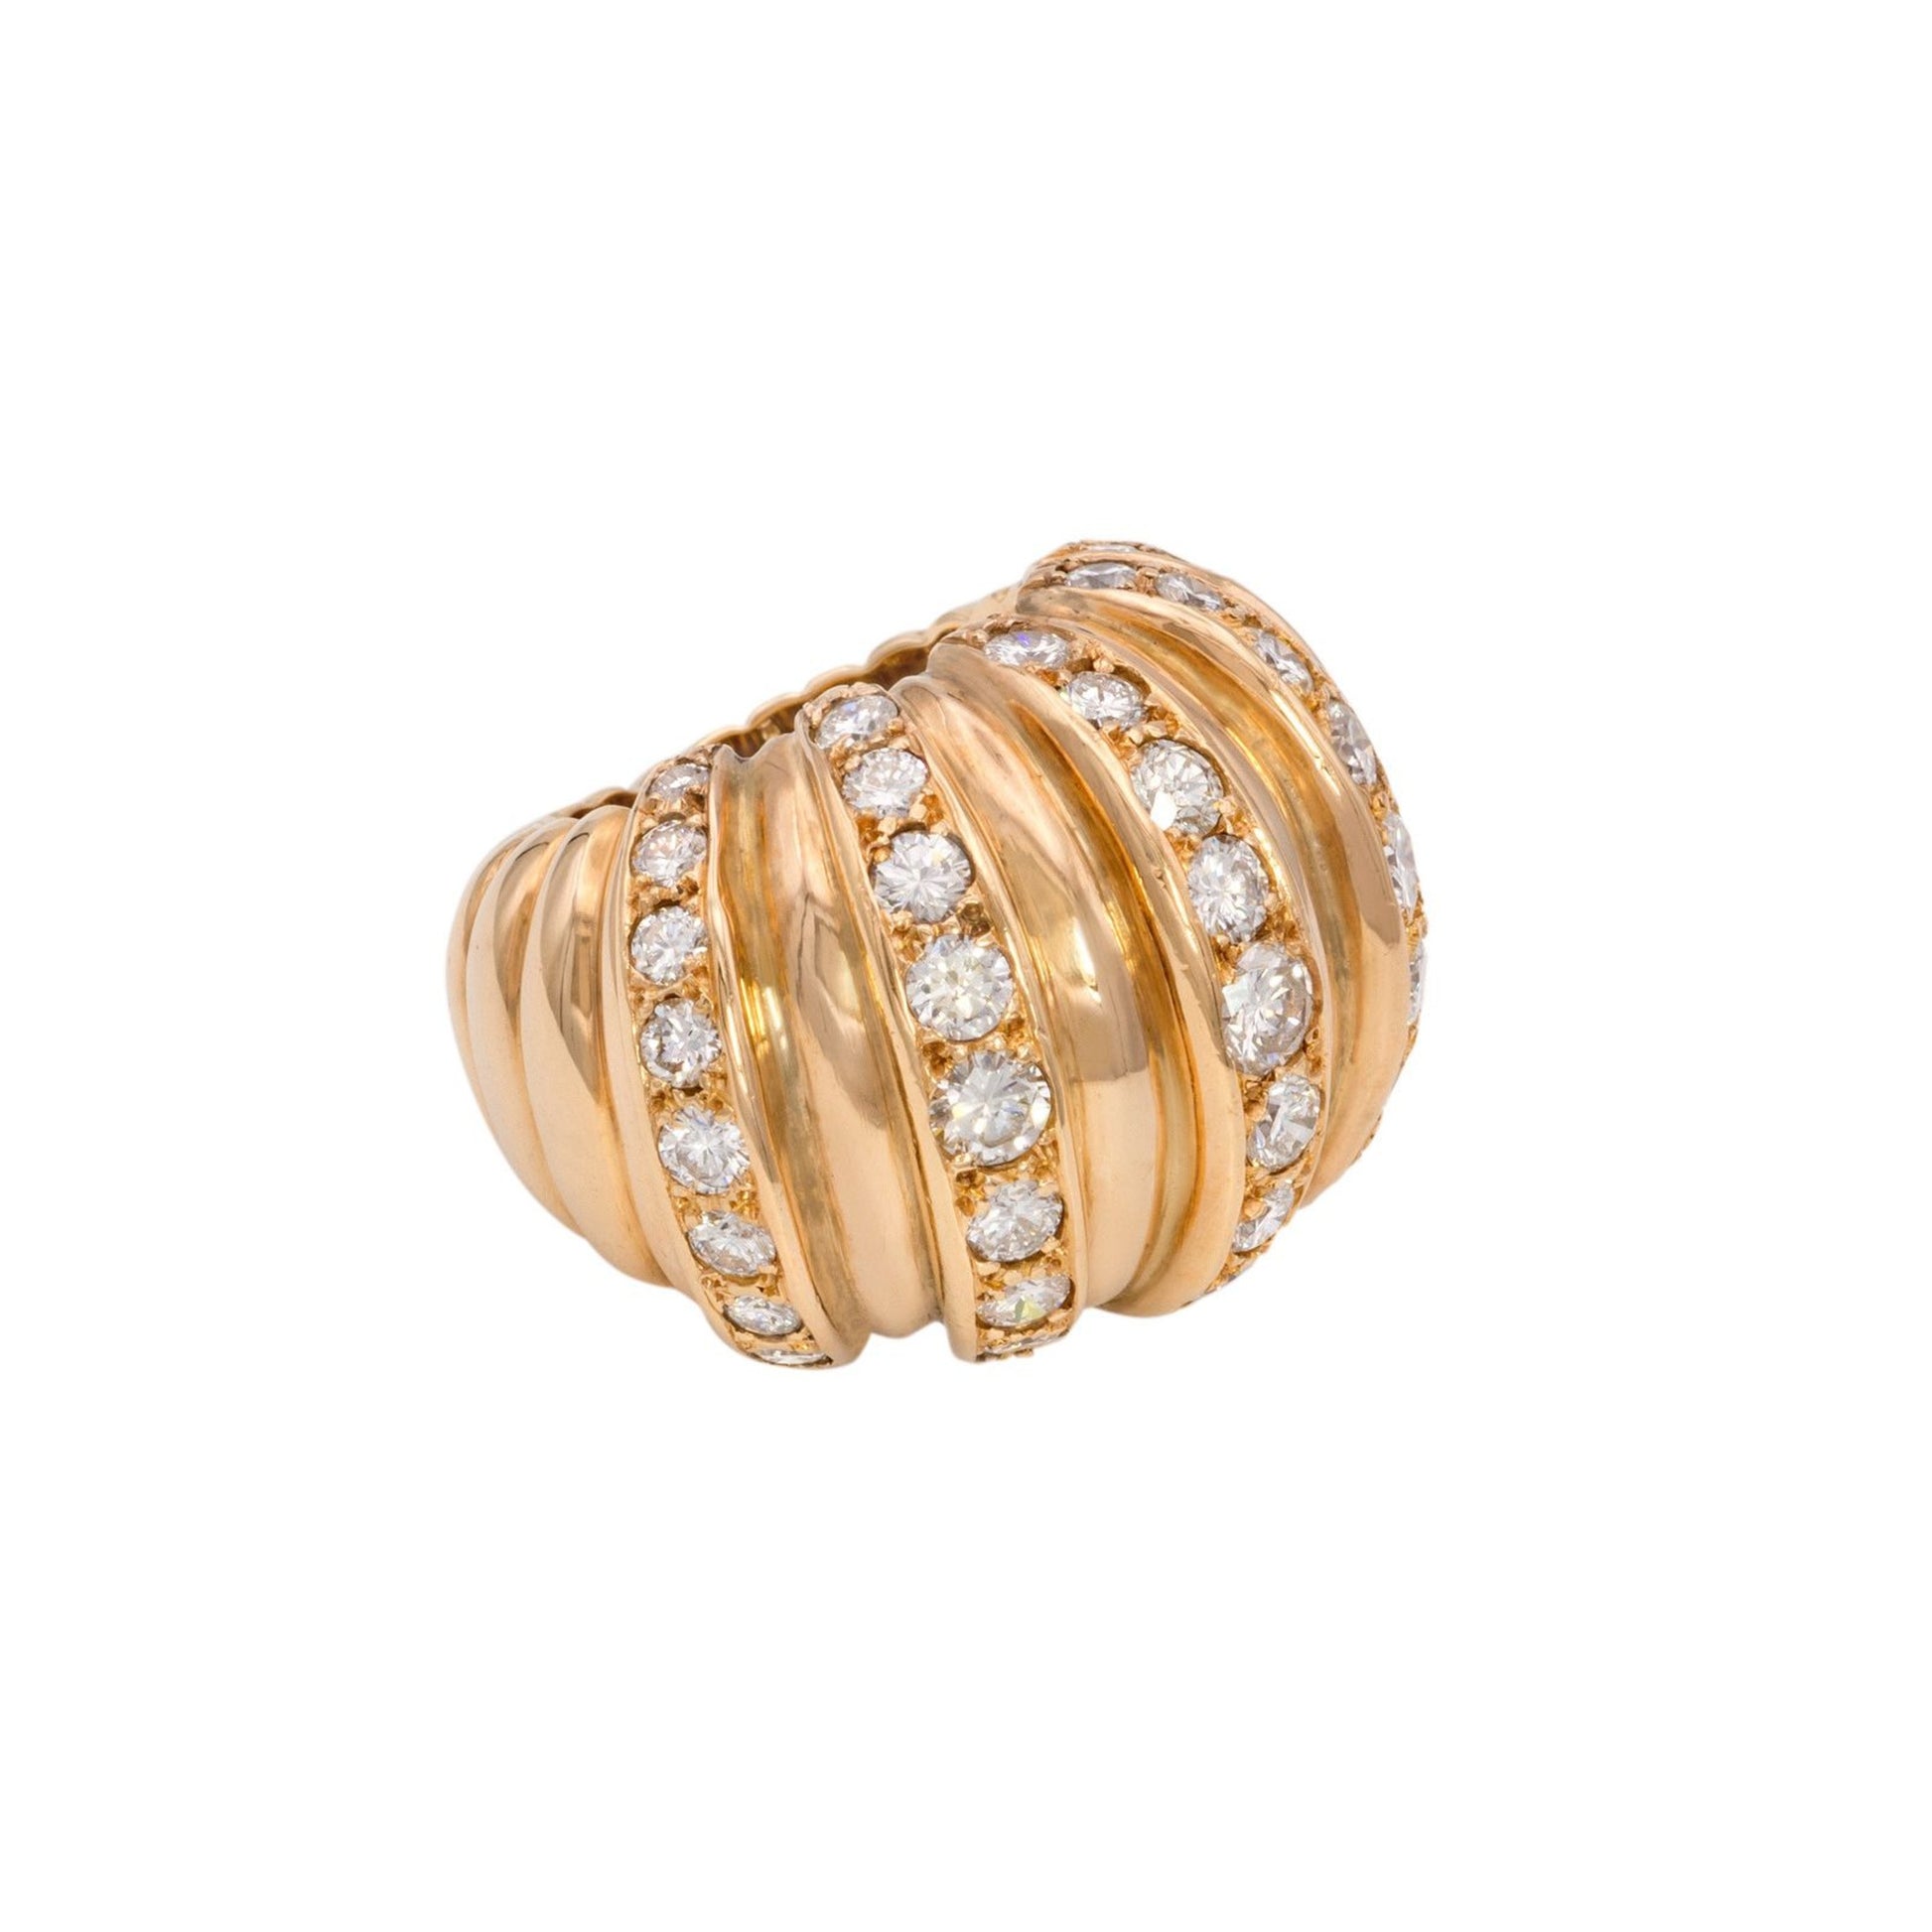 French 1950s 18KT Yellow Gold Diamond Cocktail Ring front side